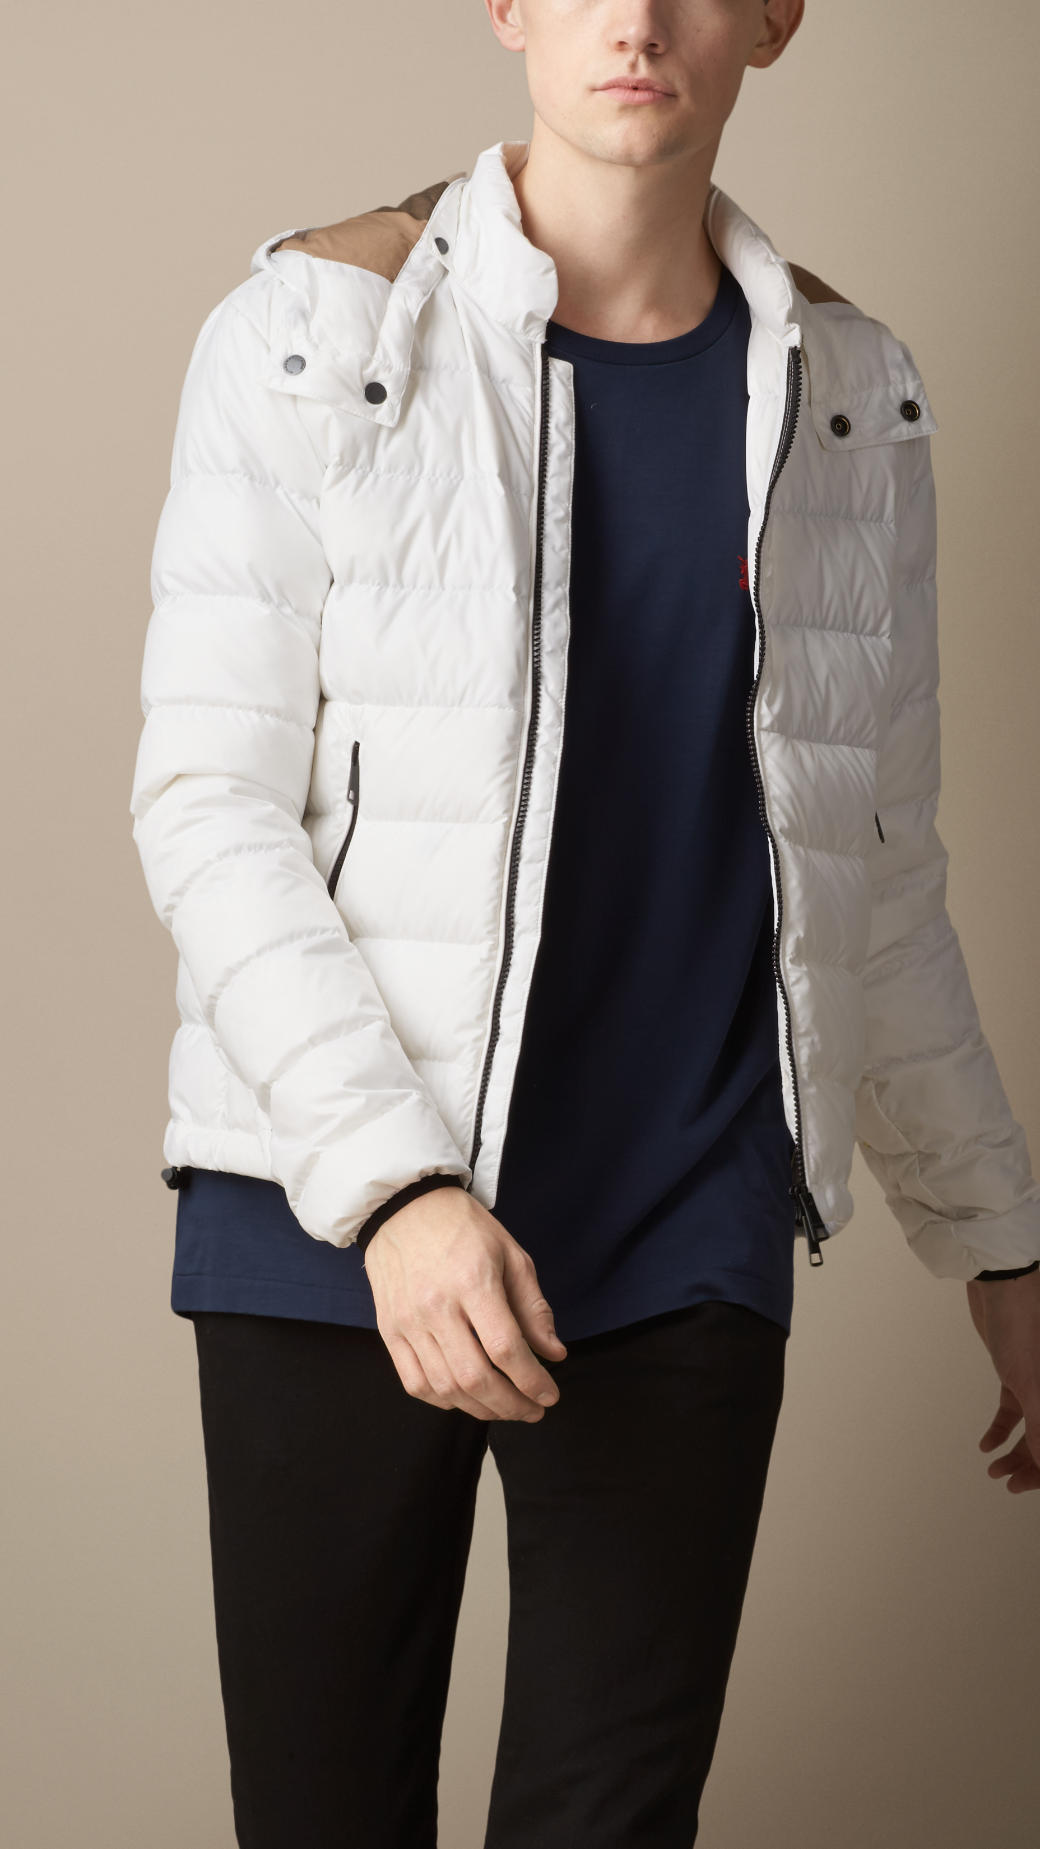 Burberry Down Filled Puffer Jacket in White for Men - Lyst